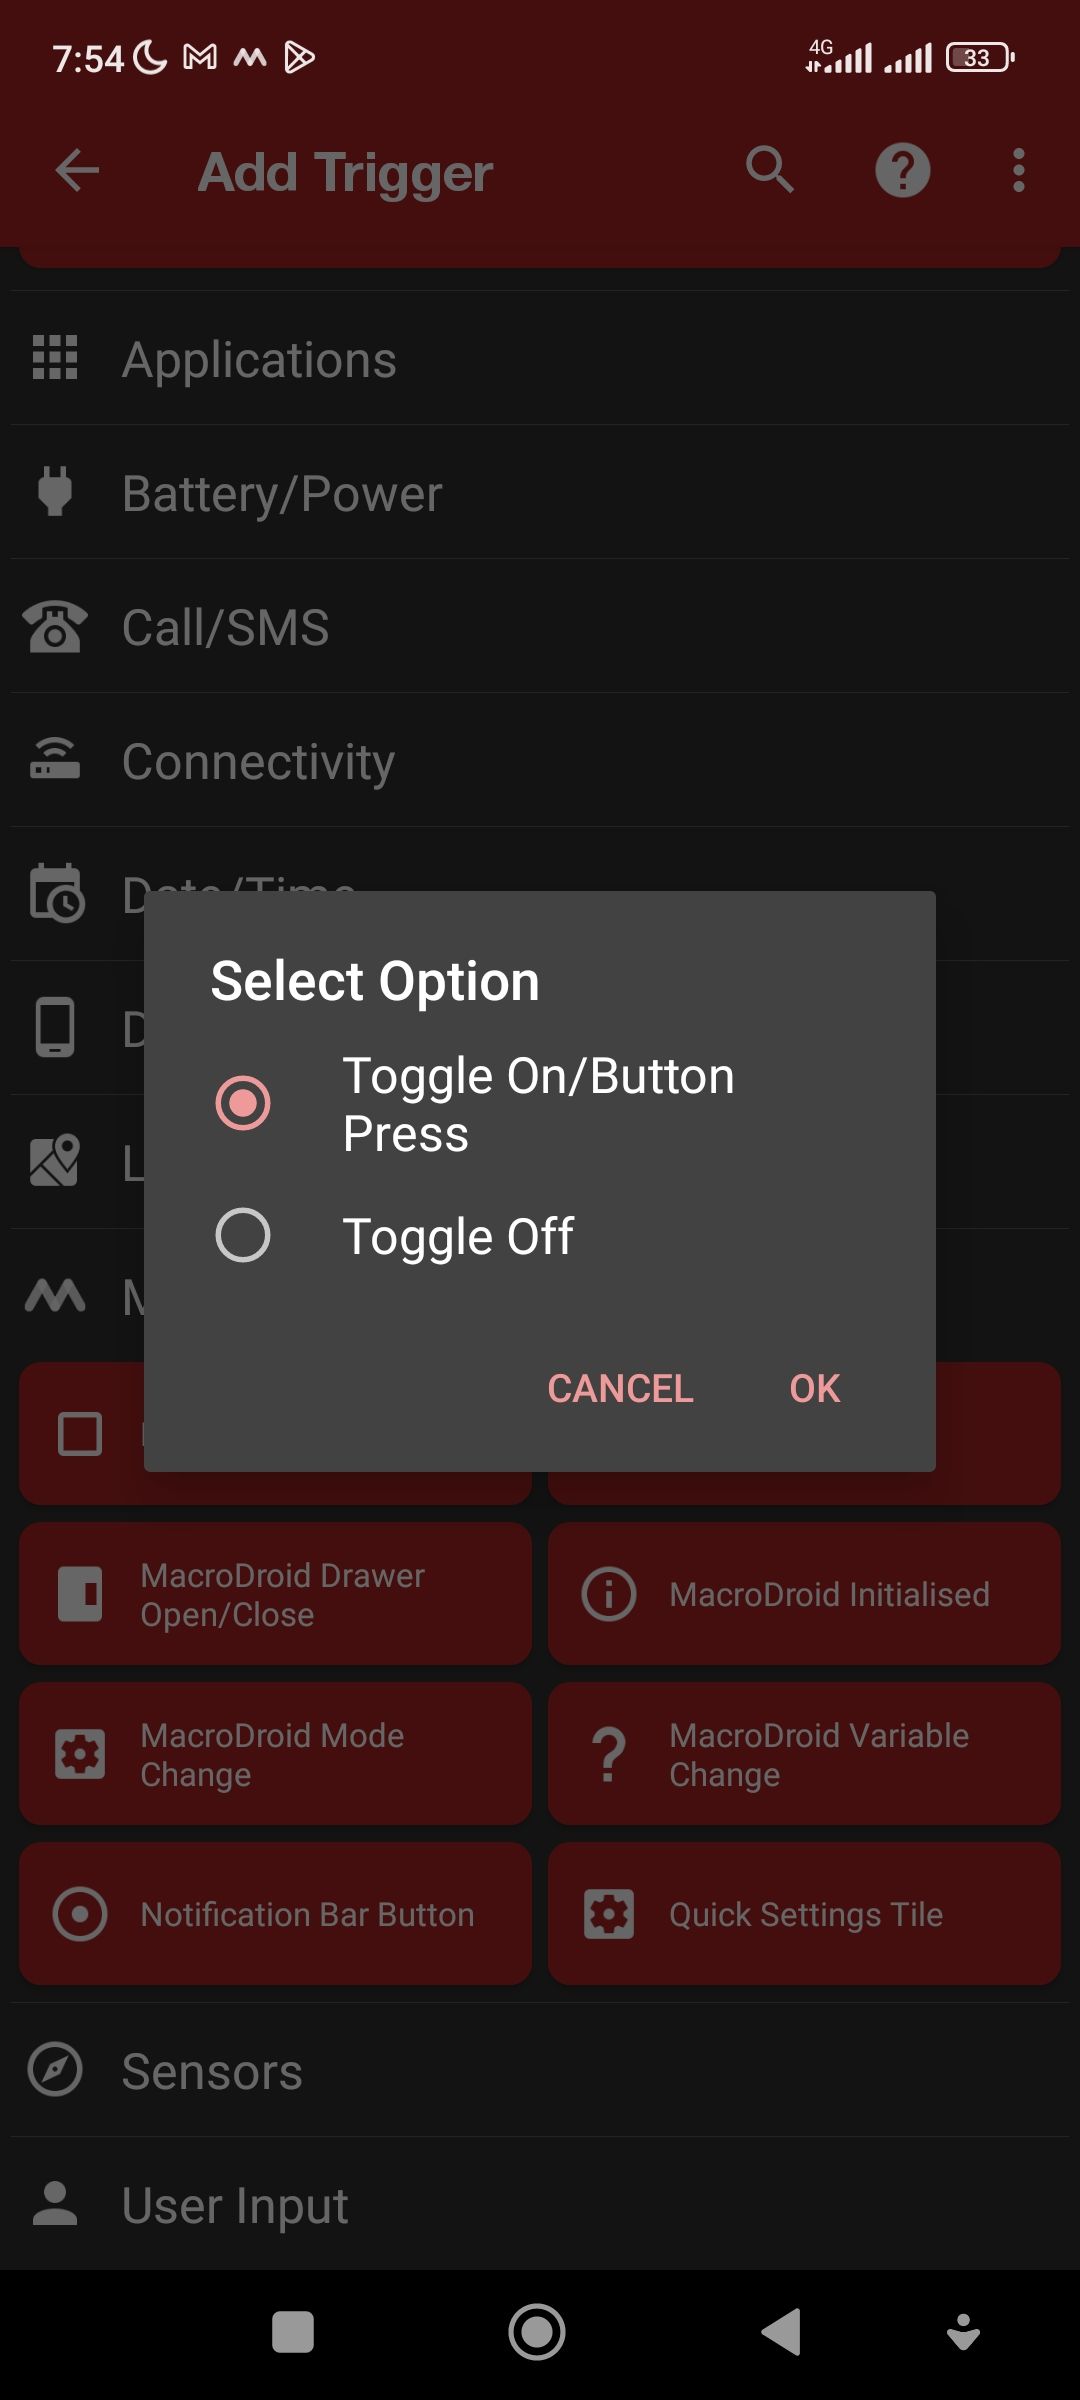 Adding a quick settings tile as a trigger on MacroDroid